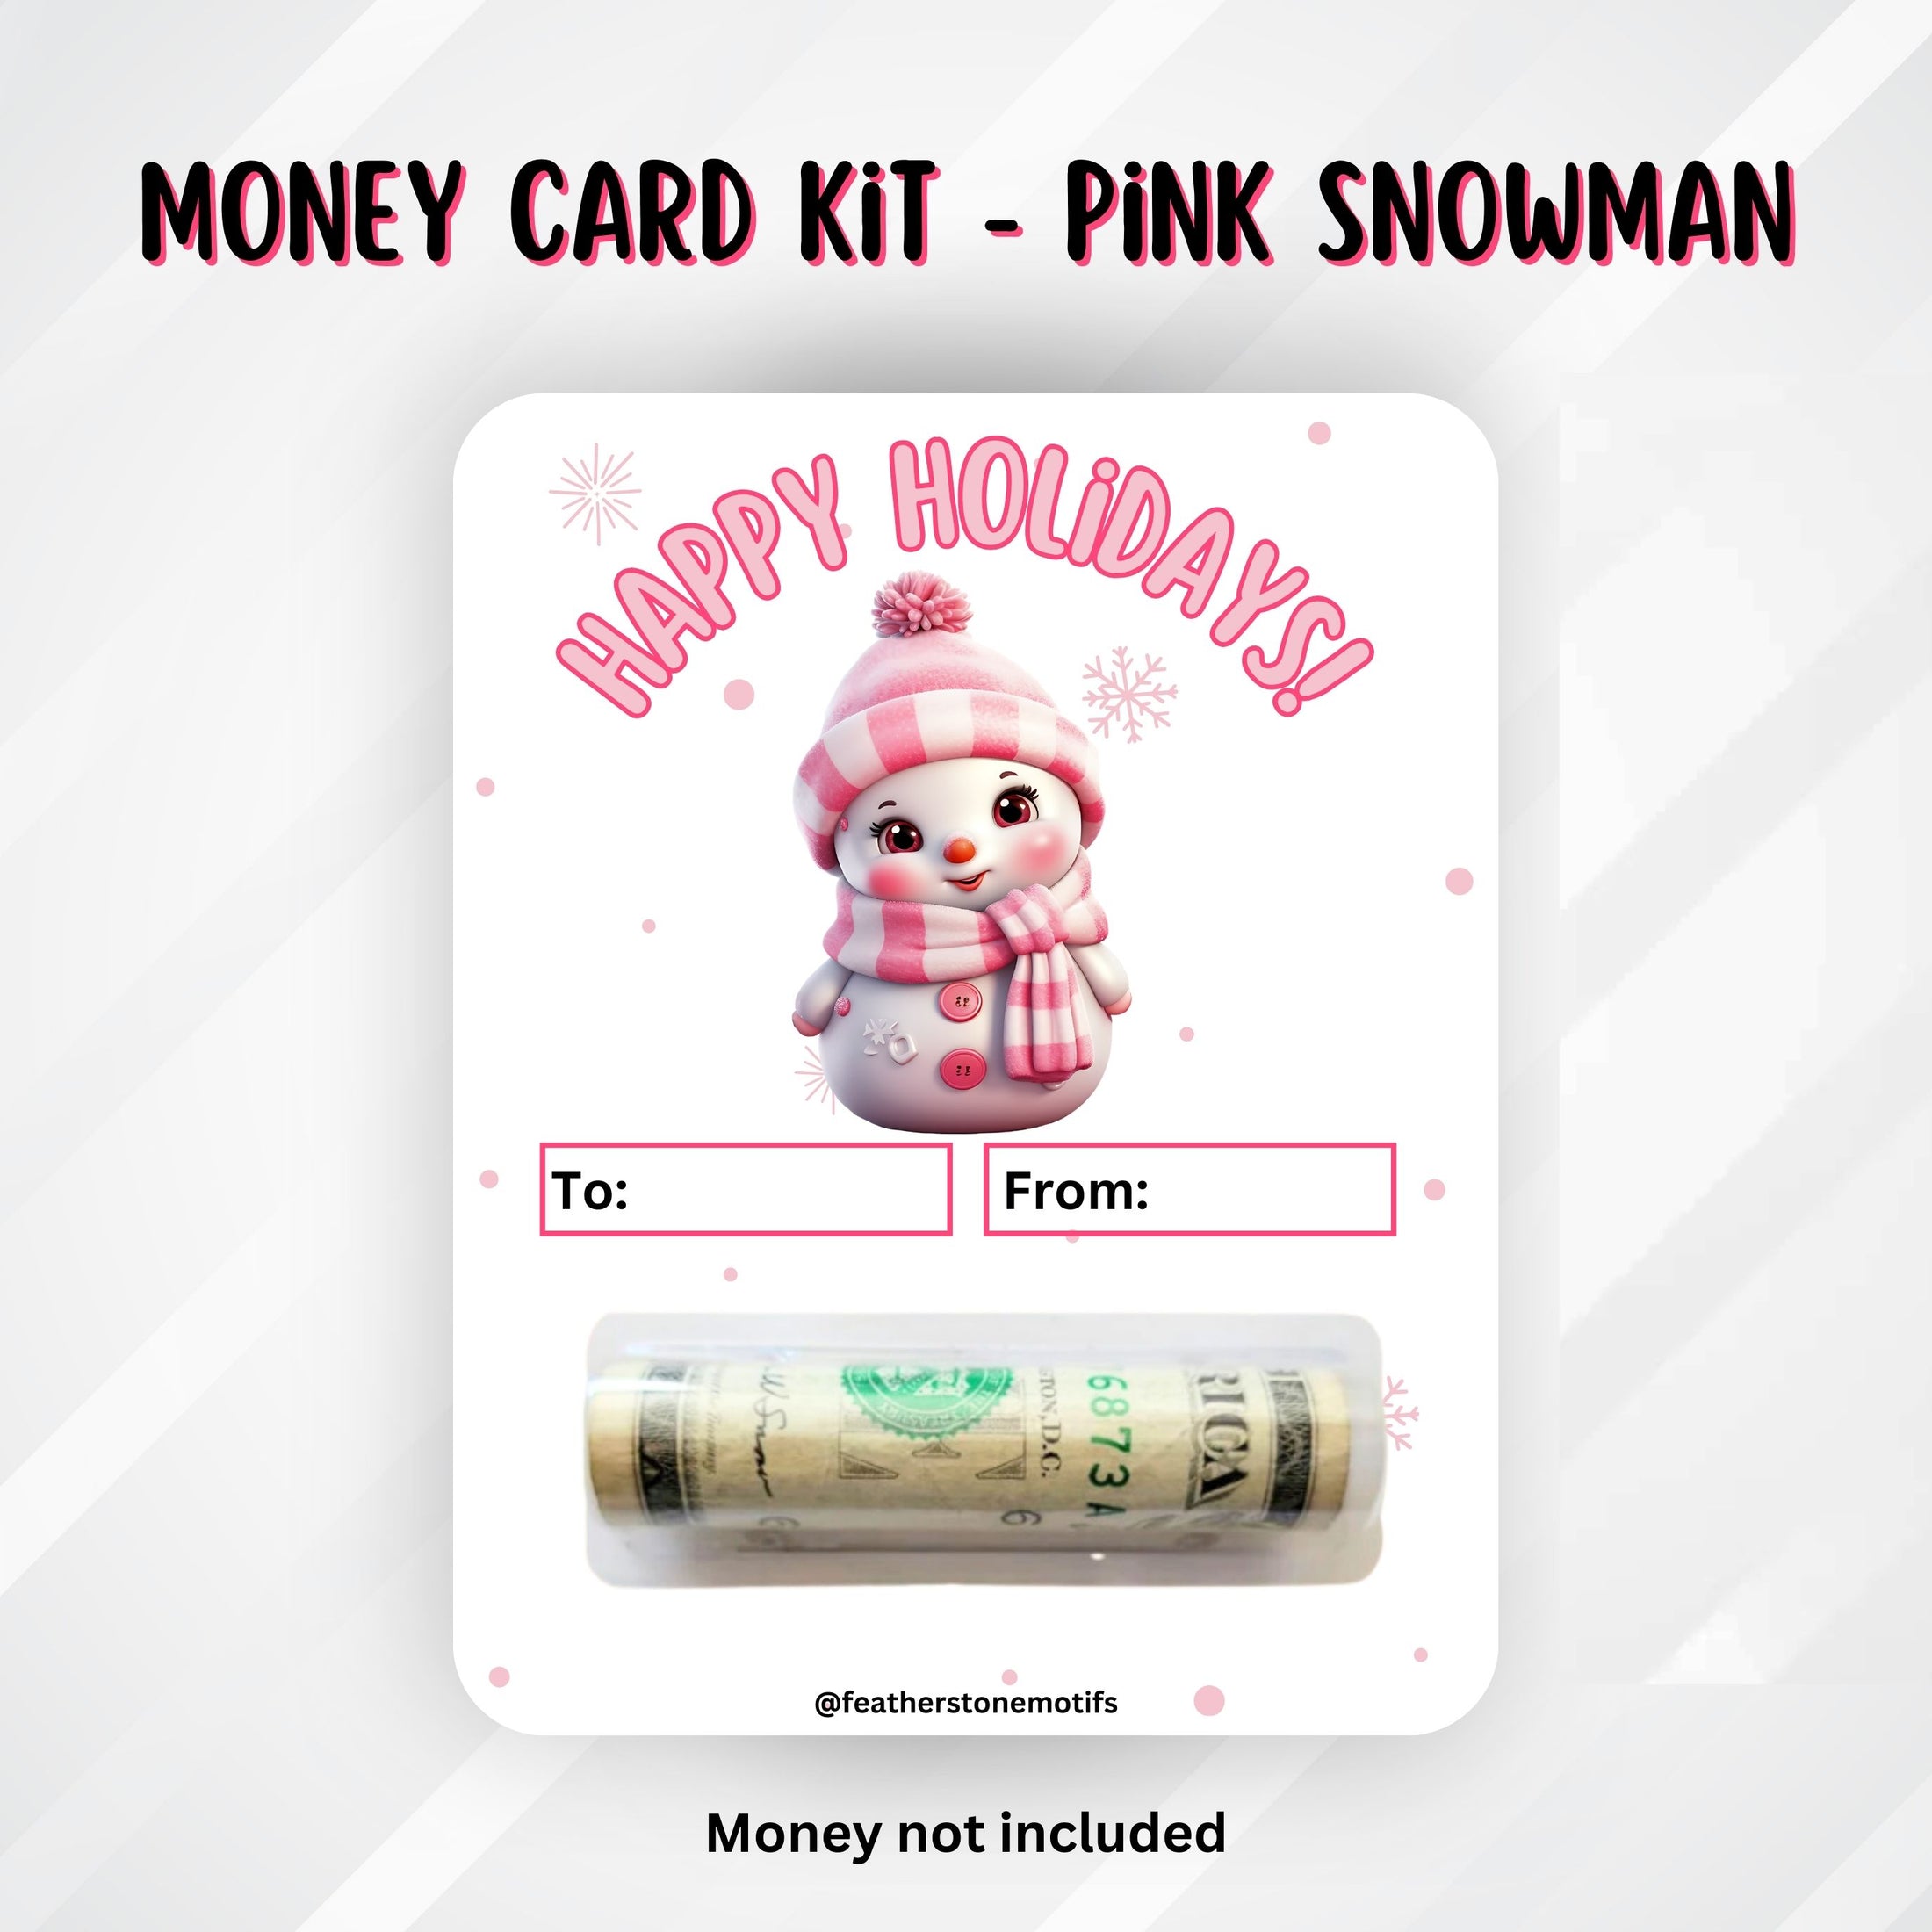 This image shows the Pink Snowman money card with money tube attached.